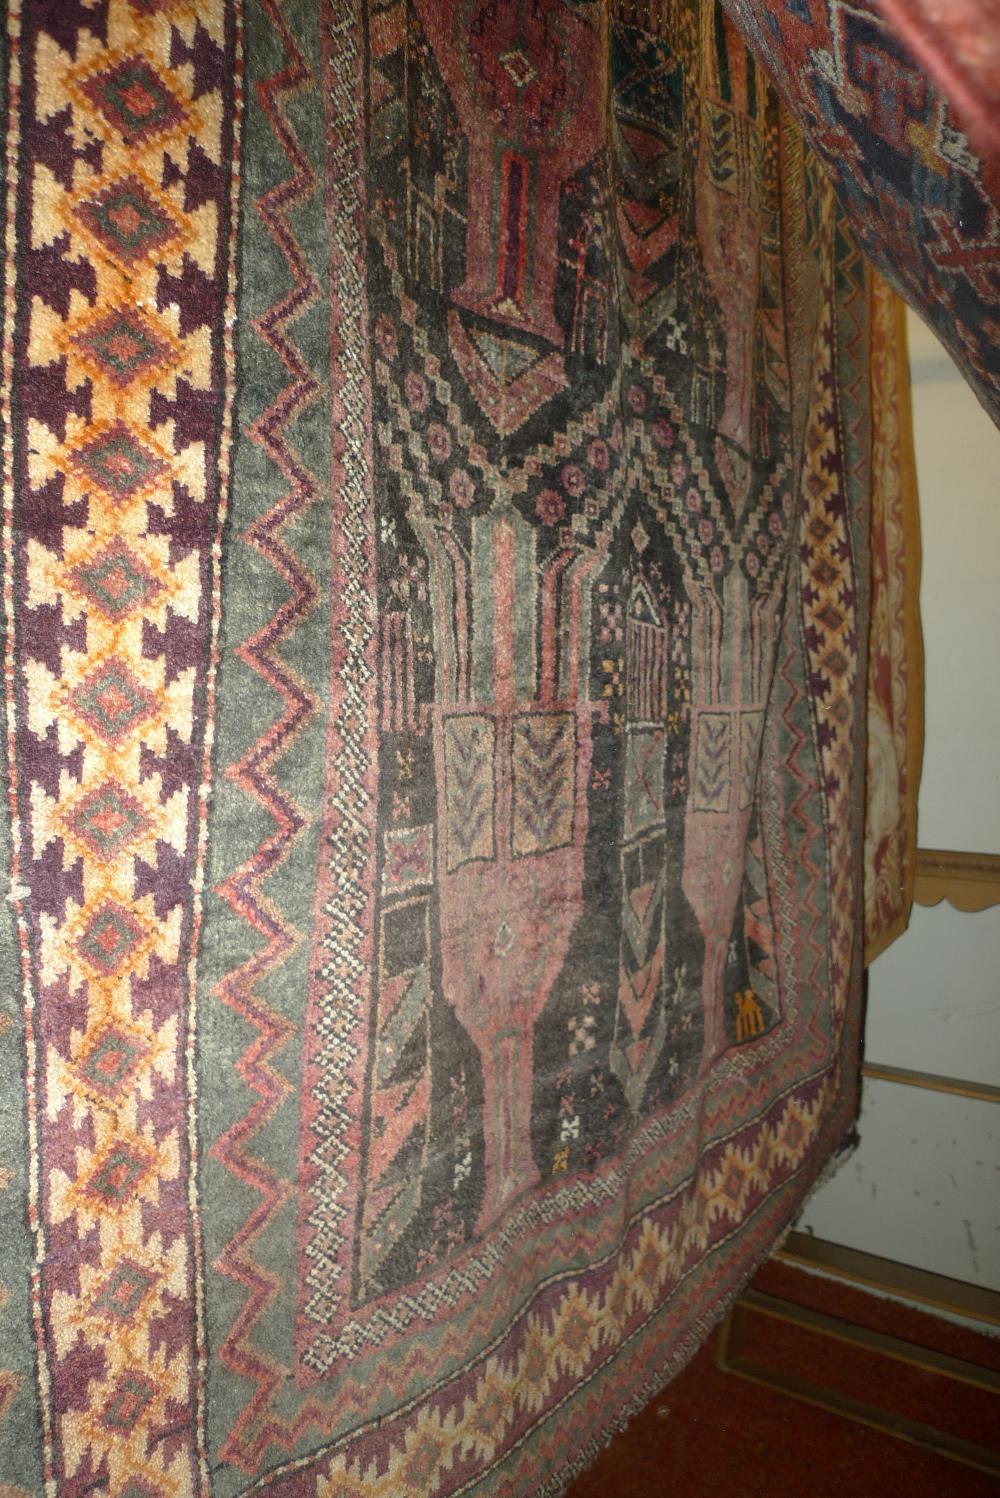 A fine North East Persian Zabul Belouch rug with motifs on a madder ground within repeating stylized